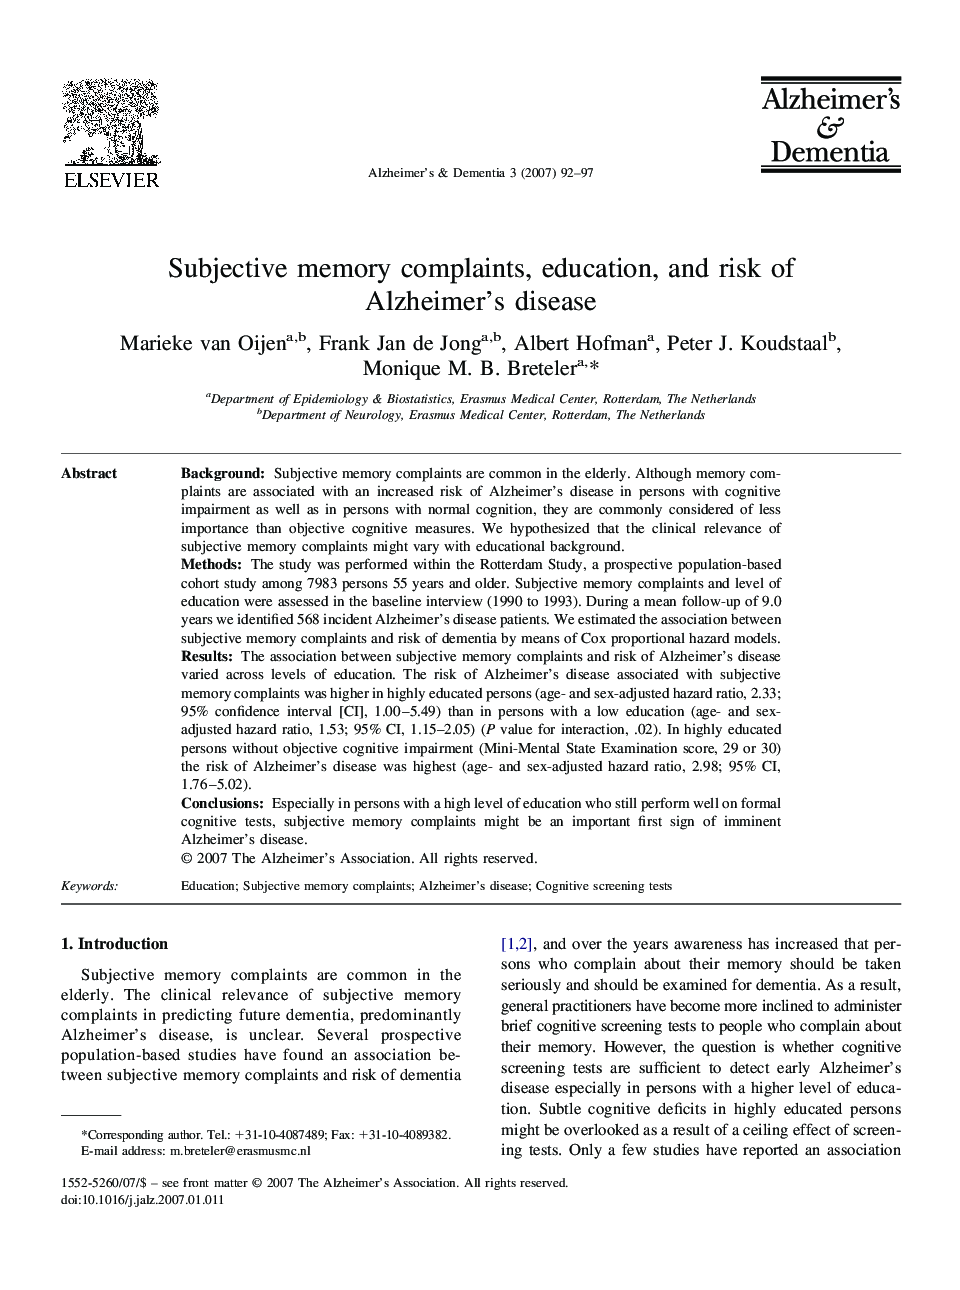 Featured articleSubjective memory complaints, education, and risk of Alzheimer's disease